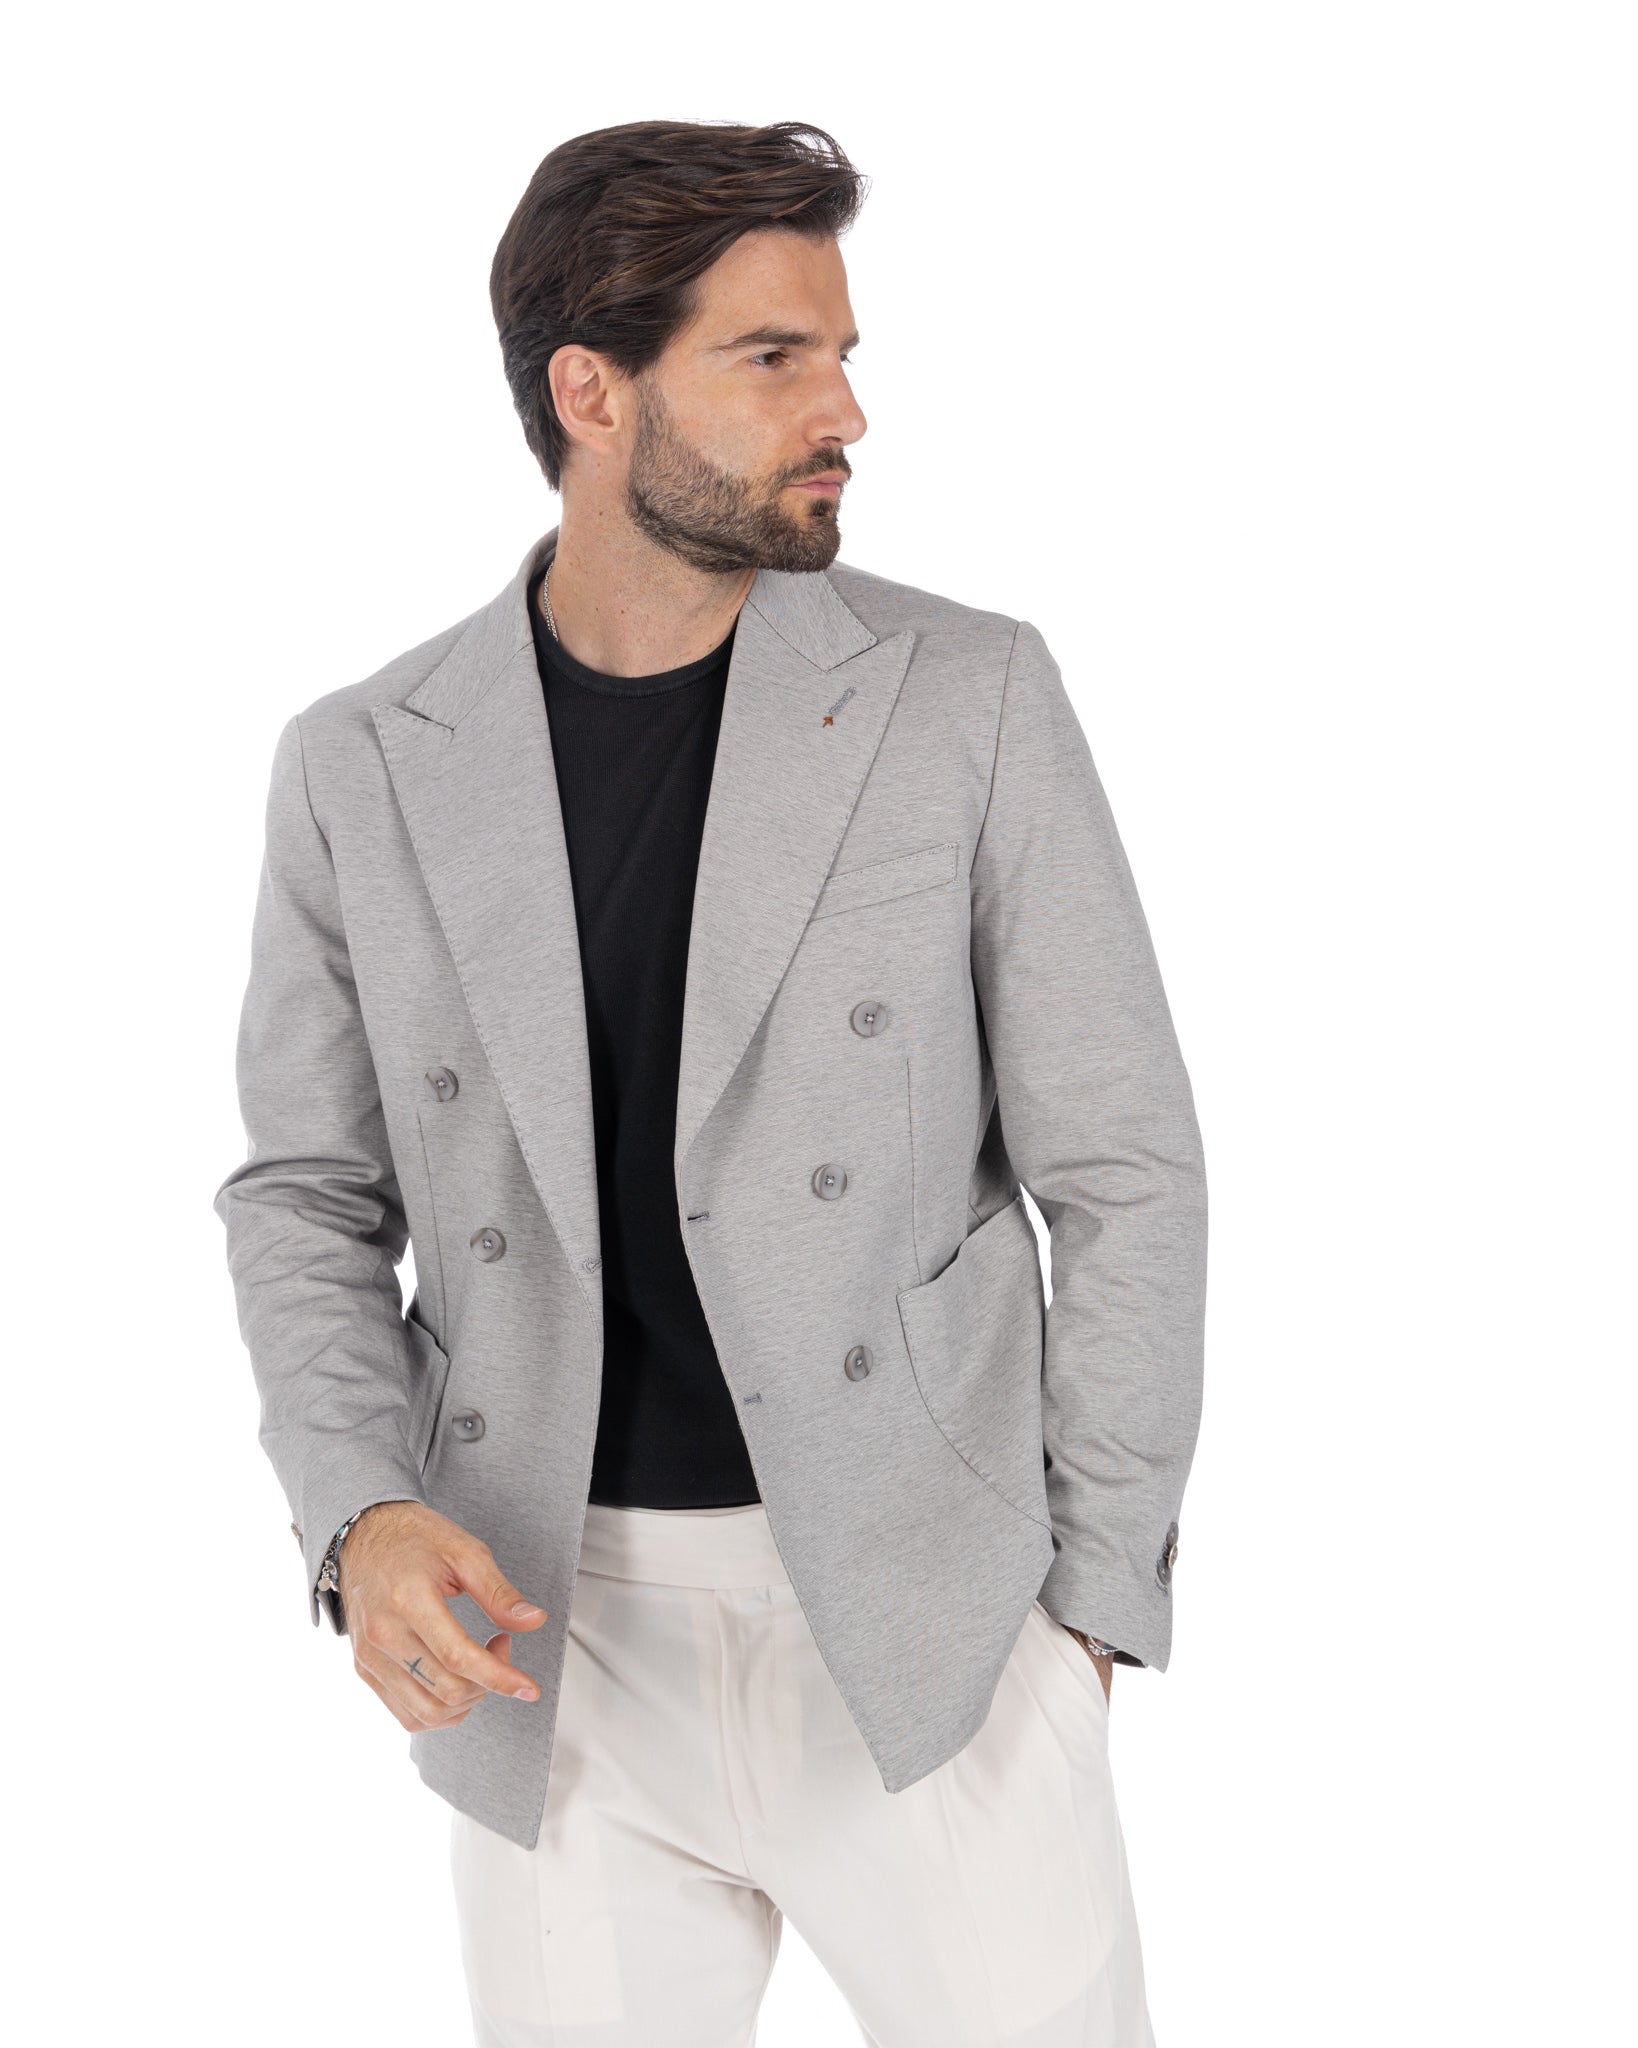 Ostuni - gray double-breasted jacket